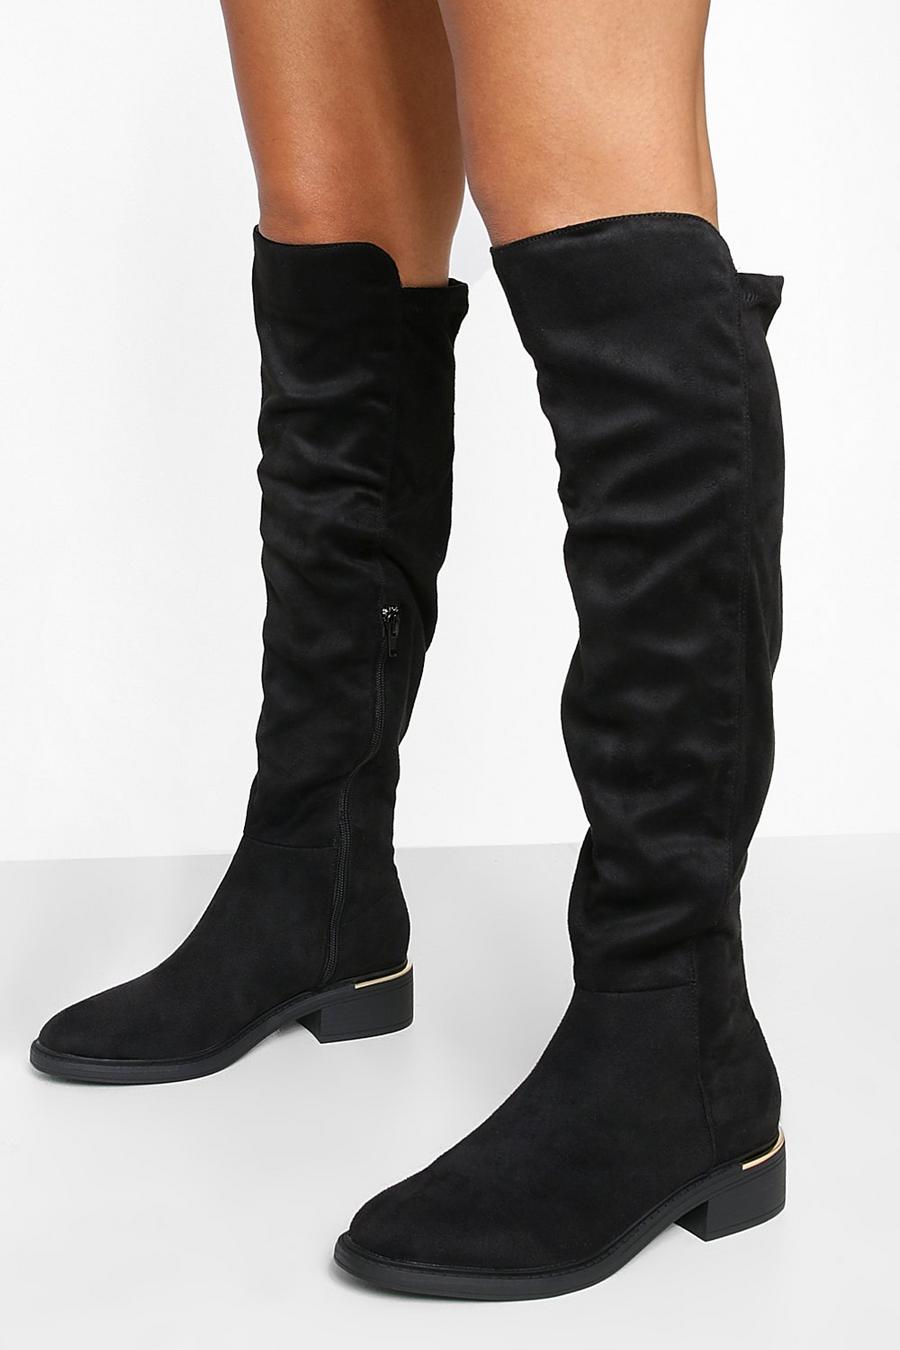 Black Over The Knee Panel Detail Boots image number 1